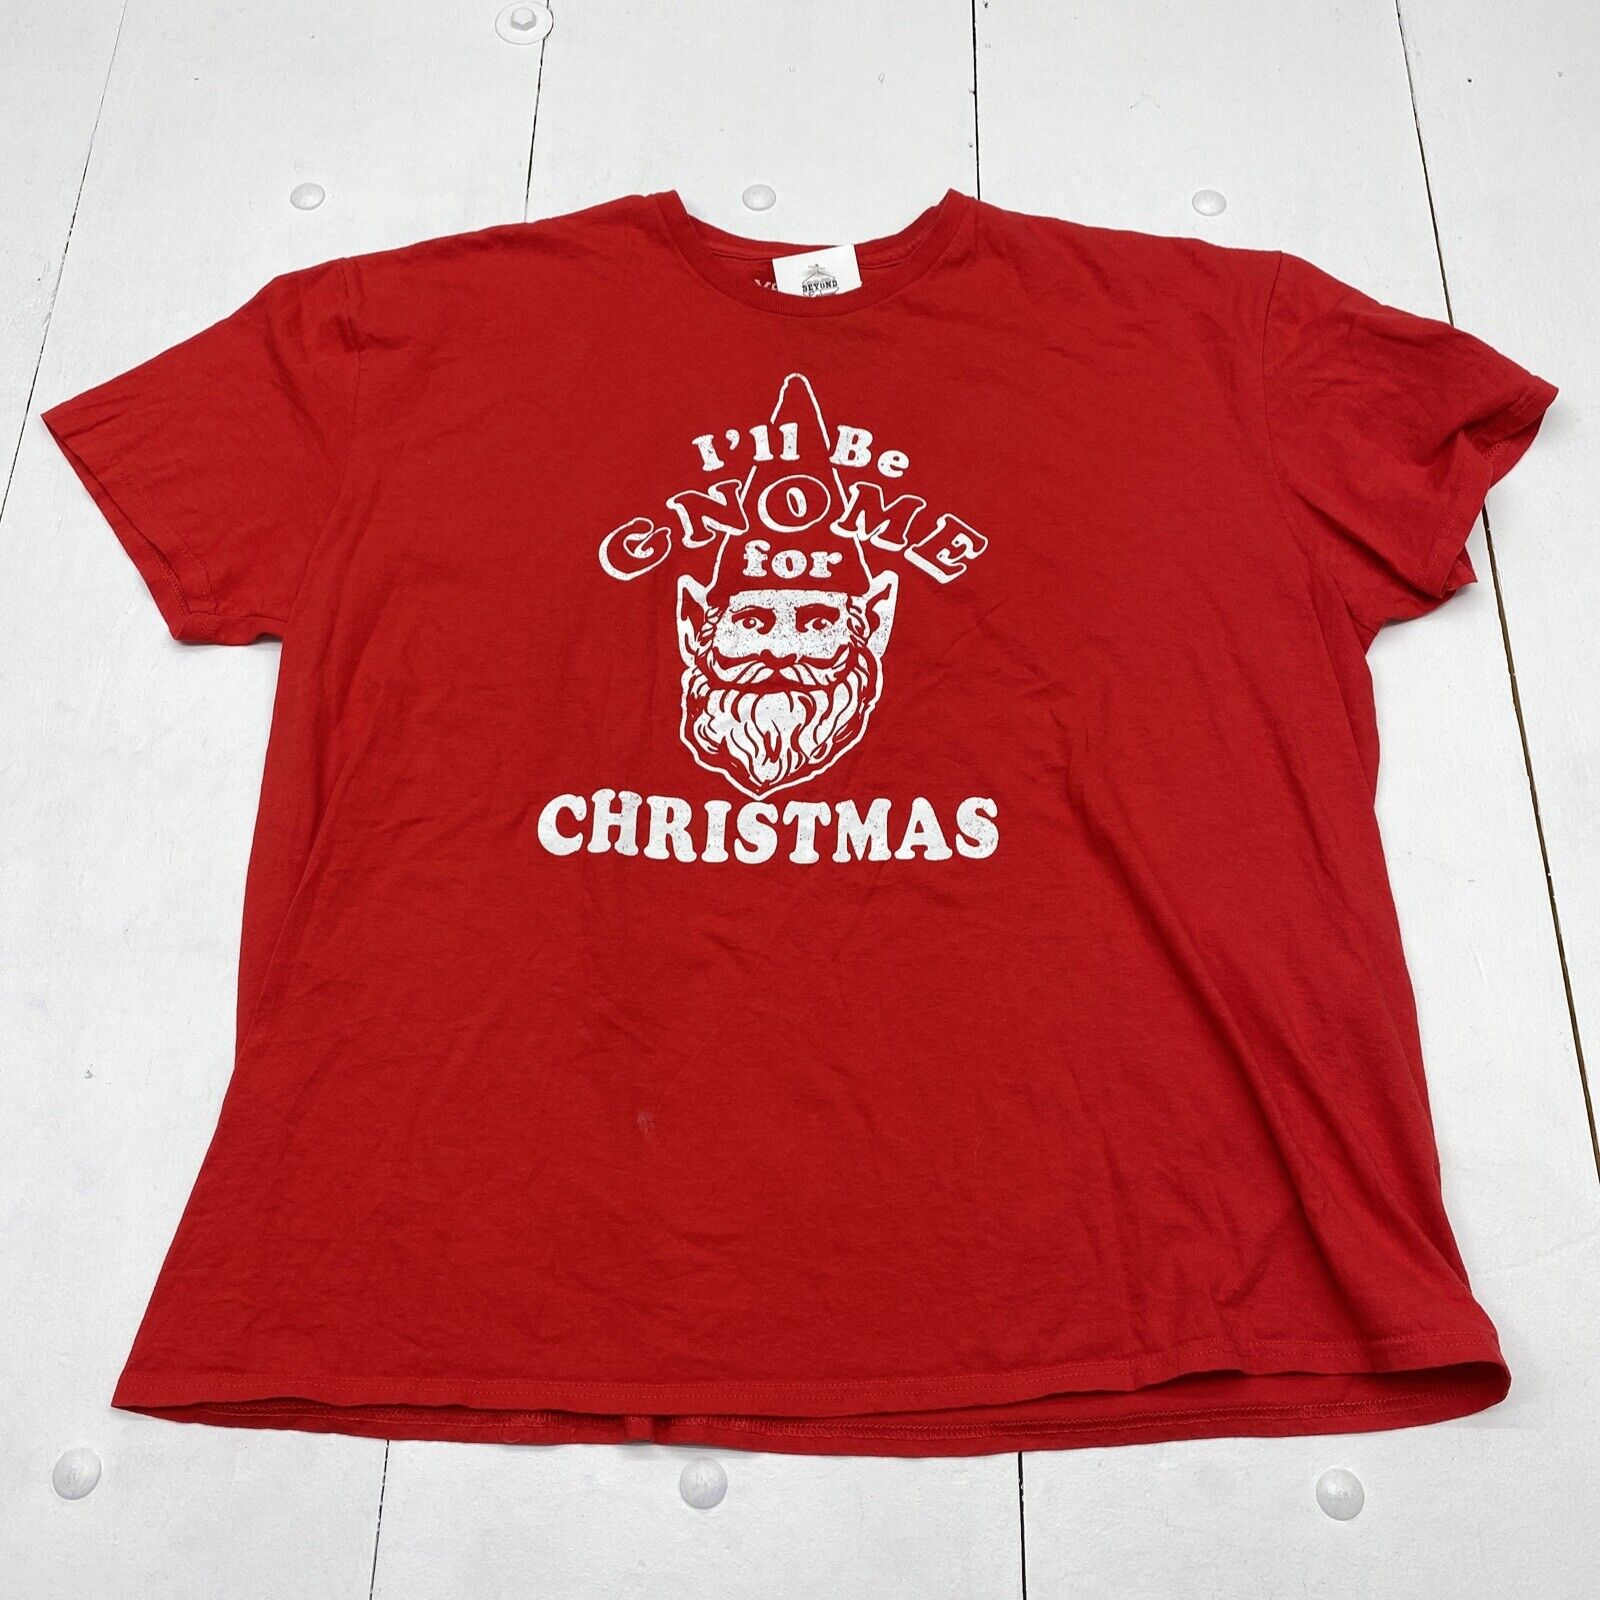 Christmas Graphic Print Red Short Sleeve T-Shirt Mens Size 2Xlarge